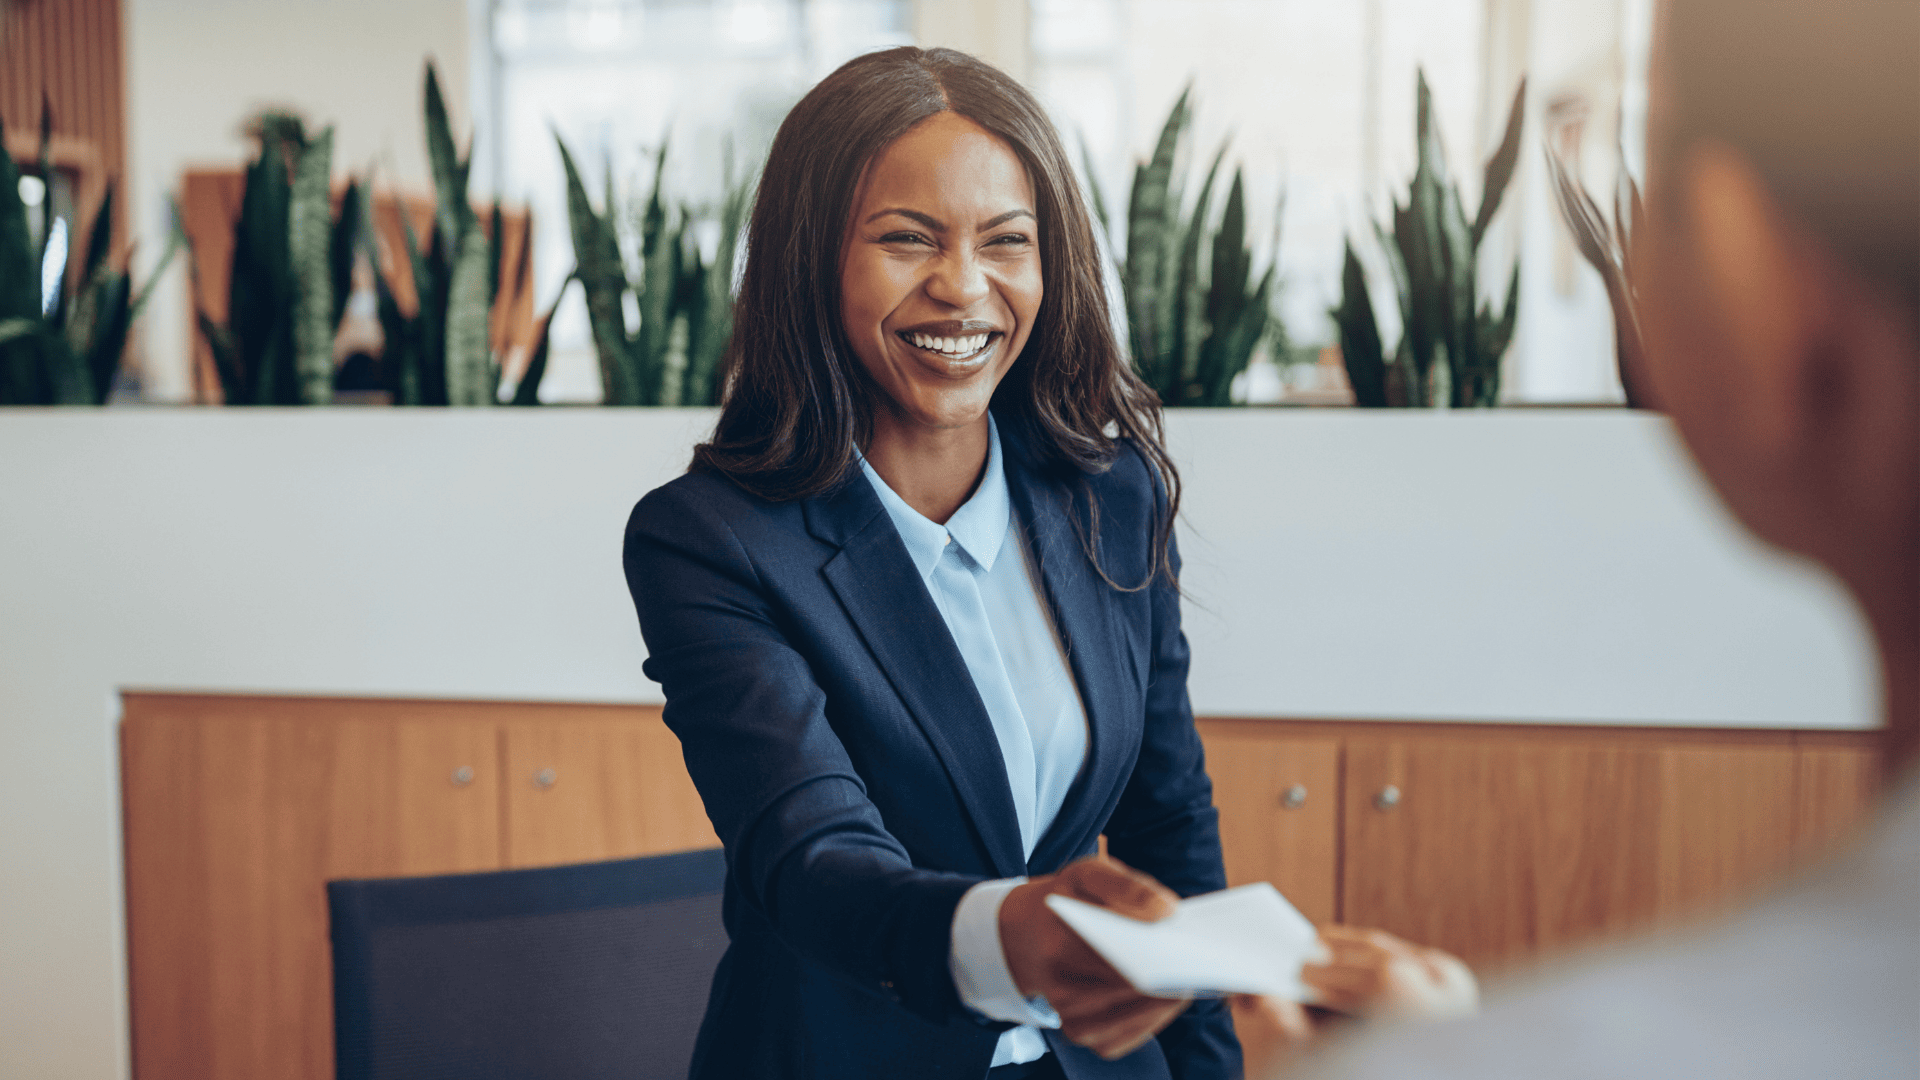 My black business woman smiling while handing a paper to employee